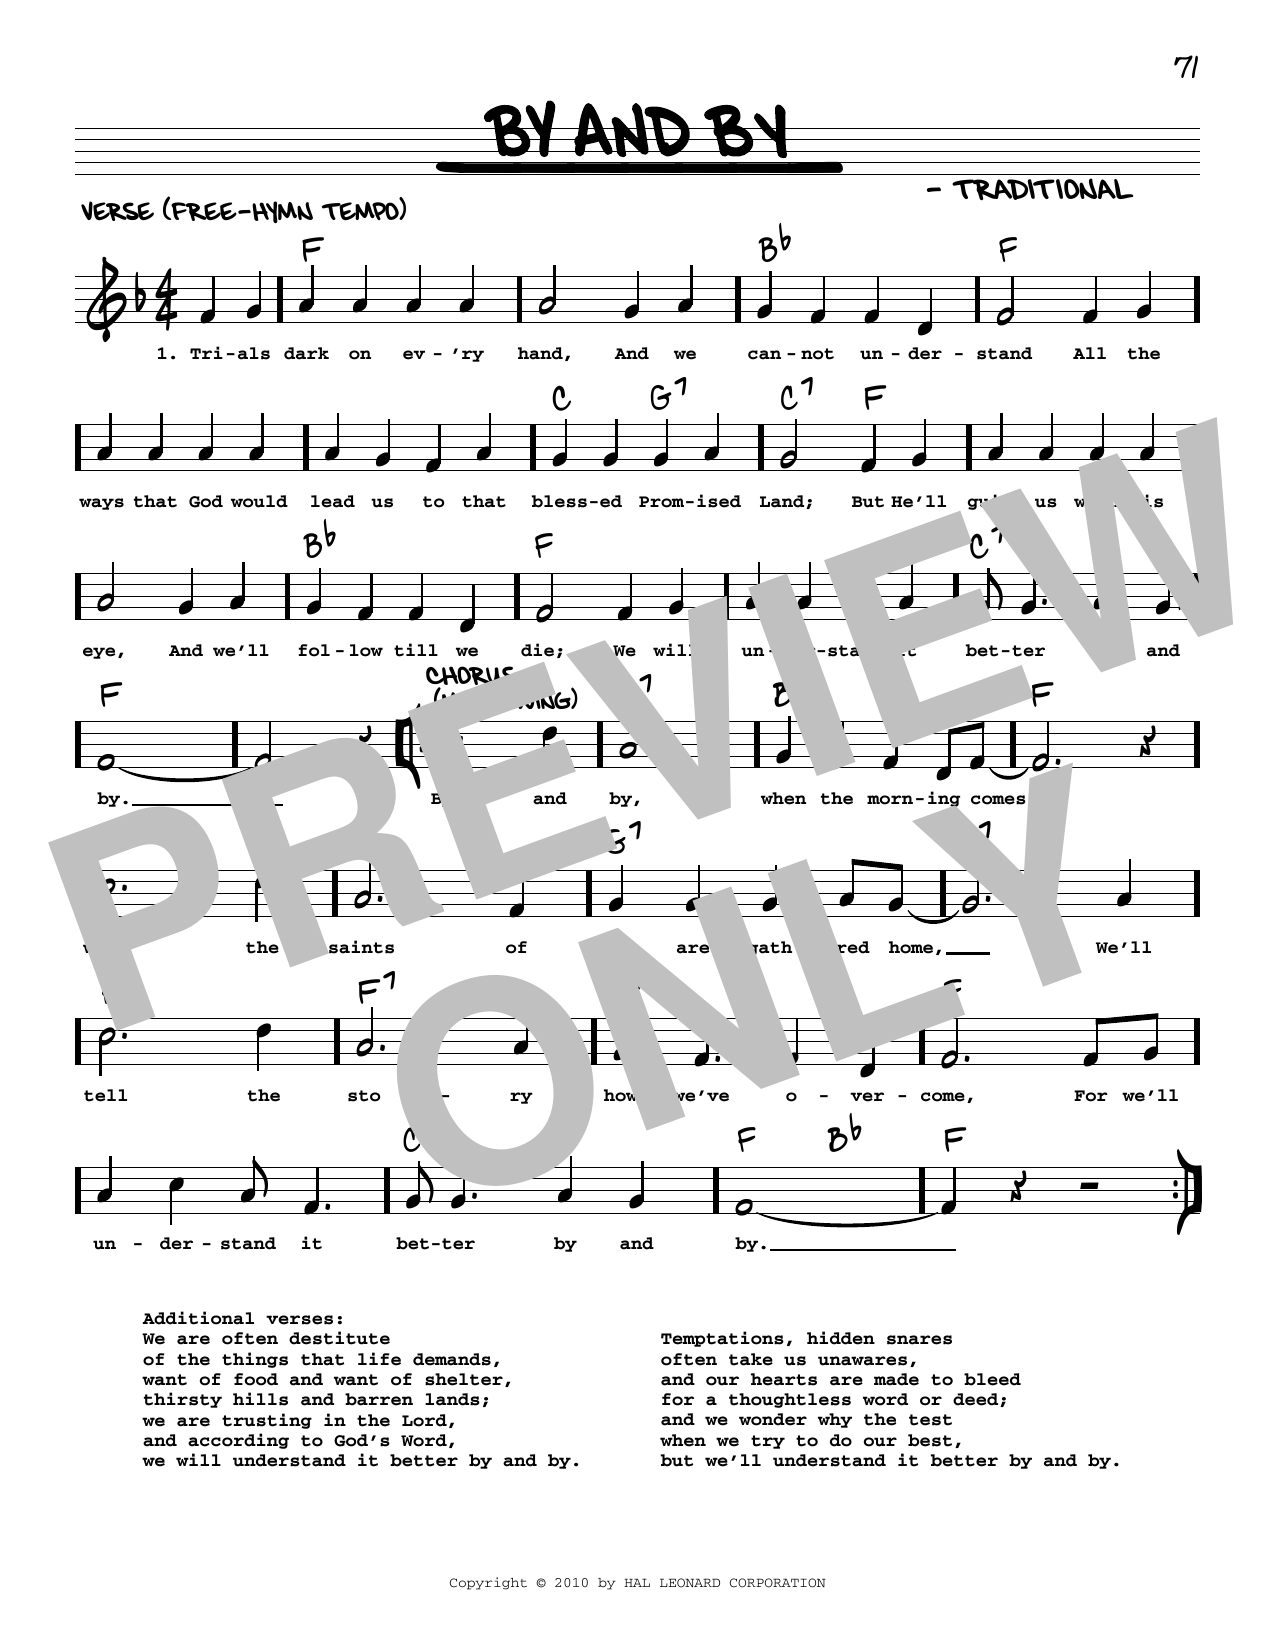 Download Traditional By And By (arr. Robert Rawlins) Sheet Music